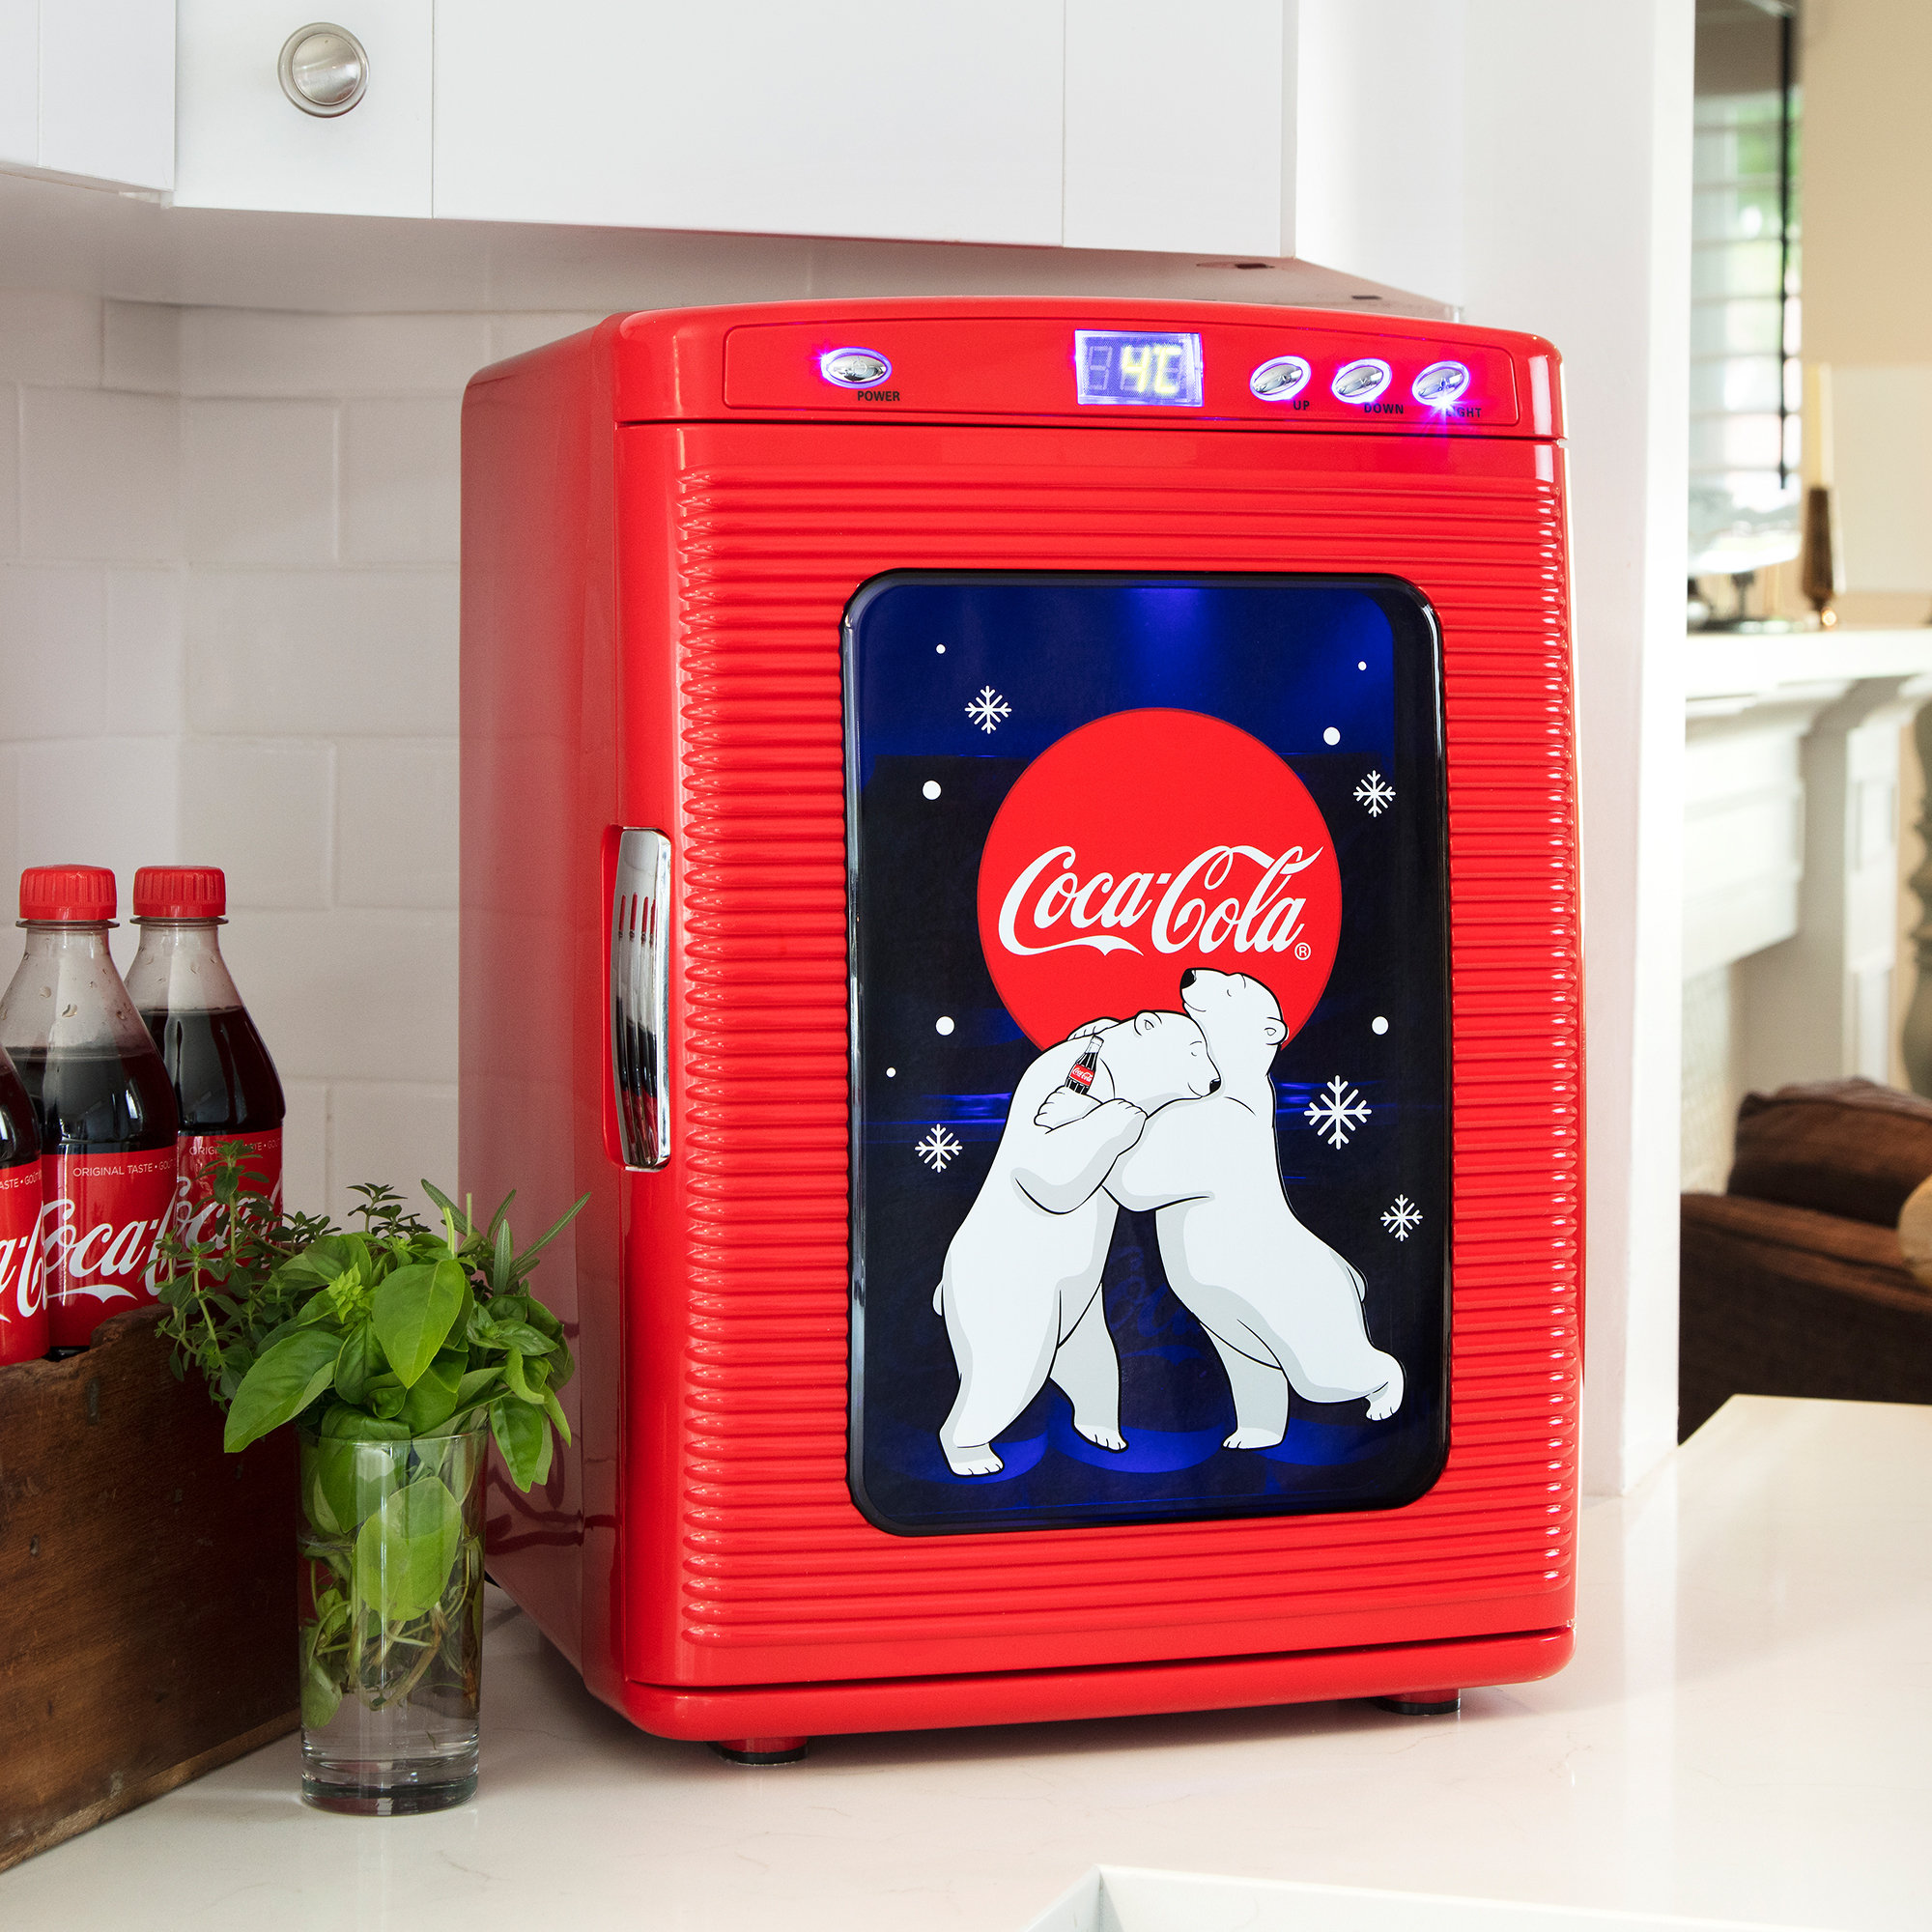 Coke Mini Fridge With Bear Is A Classic Must-Have Accessory Perfect For CocaCola 